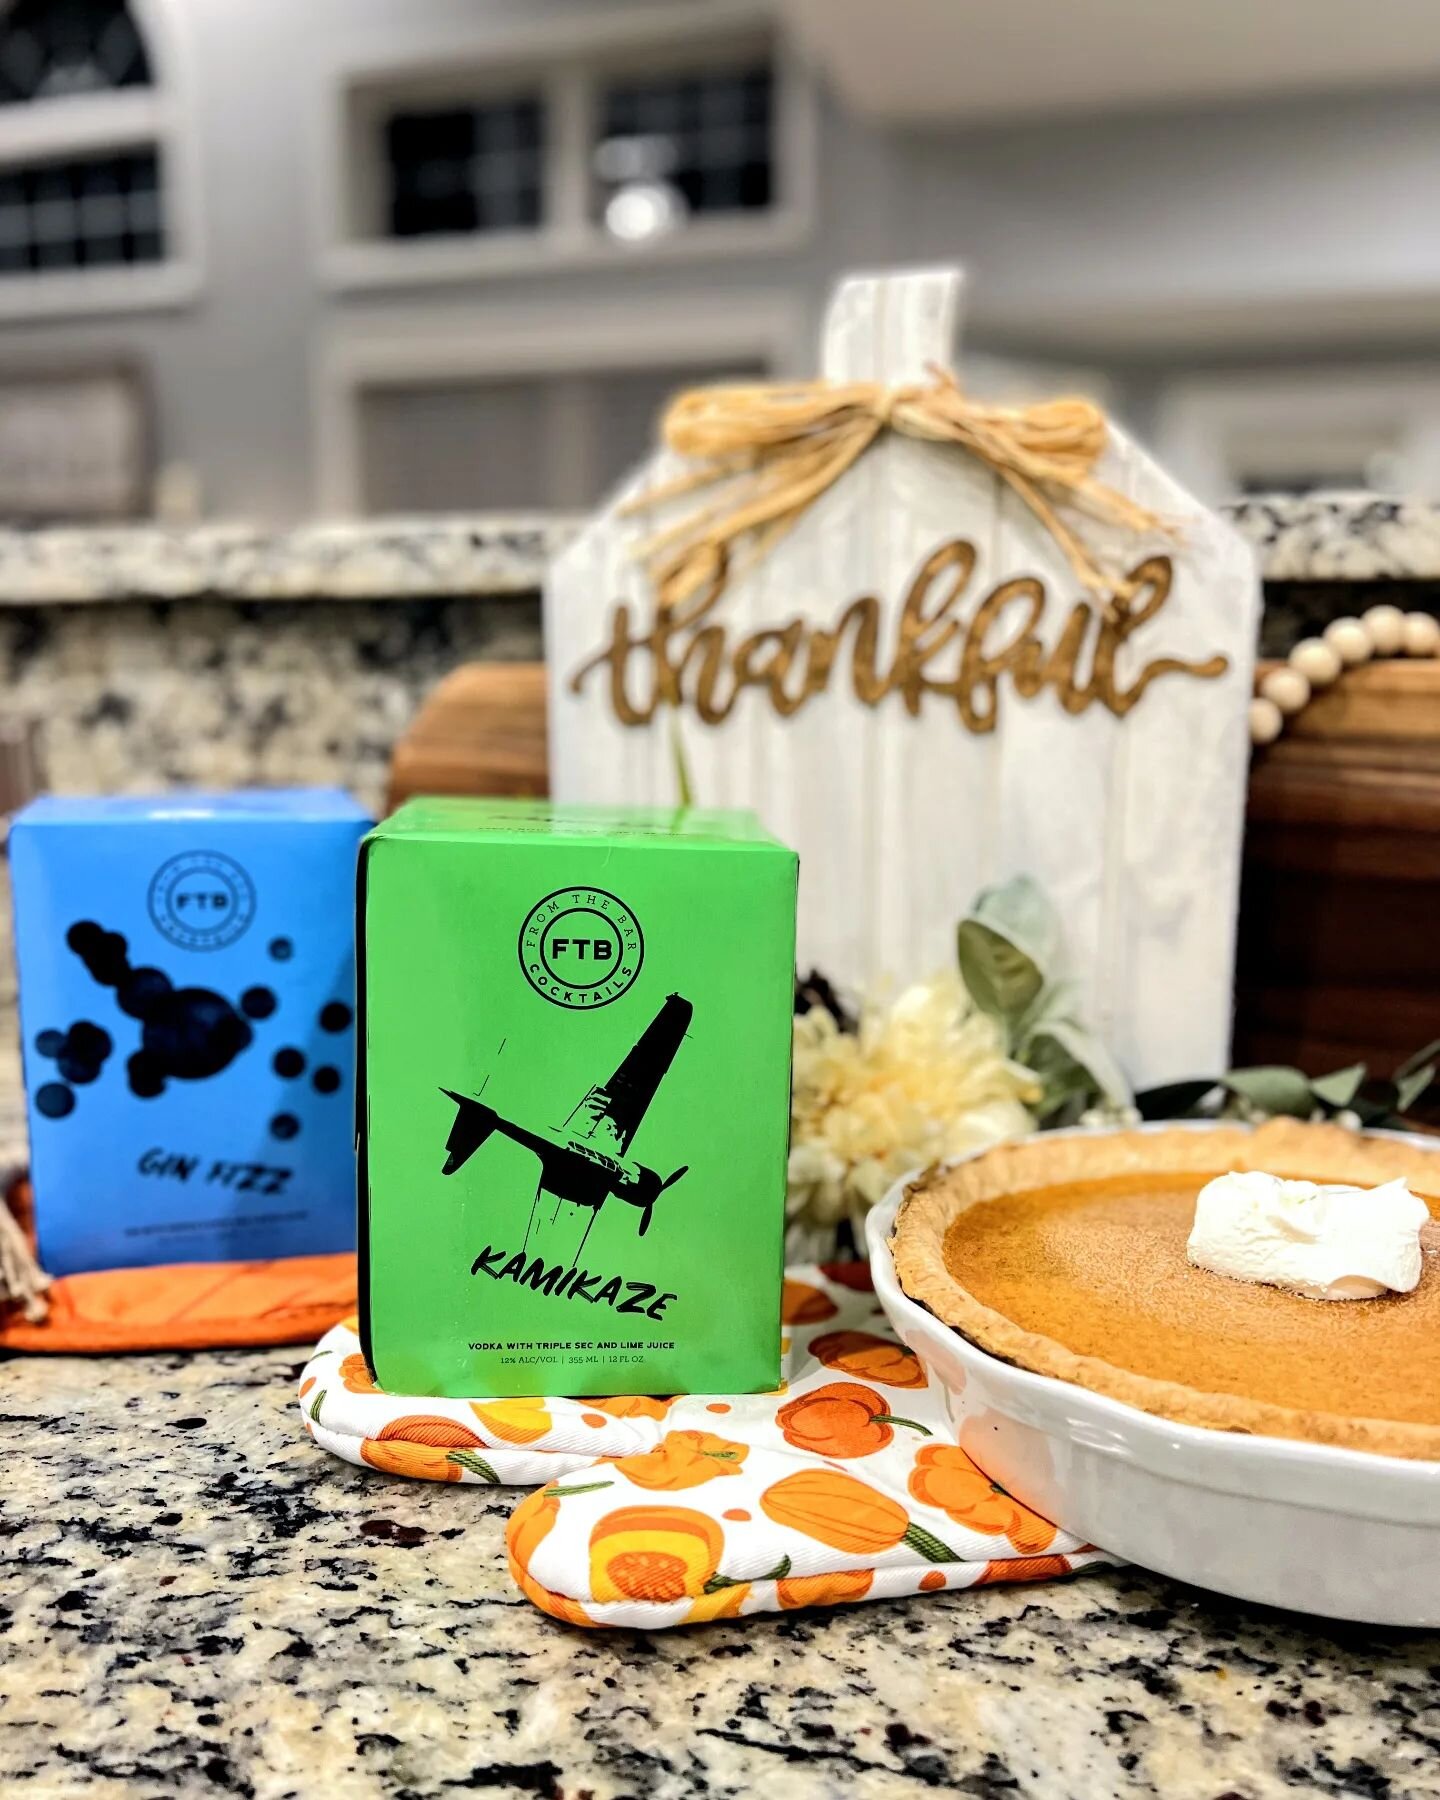 Today make it easy on yourself, don't play bartender after cooking that Thanksgiving meal, grab some FTB and enjoy the company! 
Happy Thanksgiving to all, #gobblegobble #happythanksgivng 
#ftbcocktails #thebarisinyourfridge